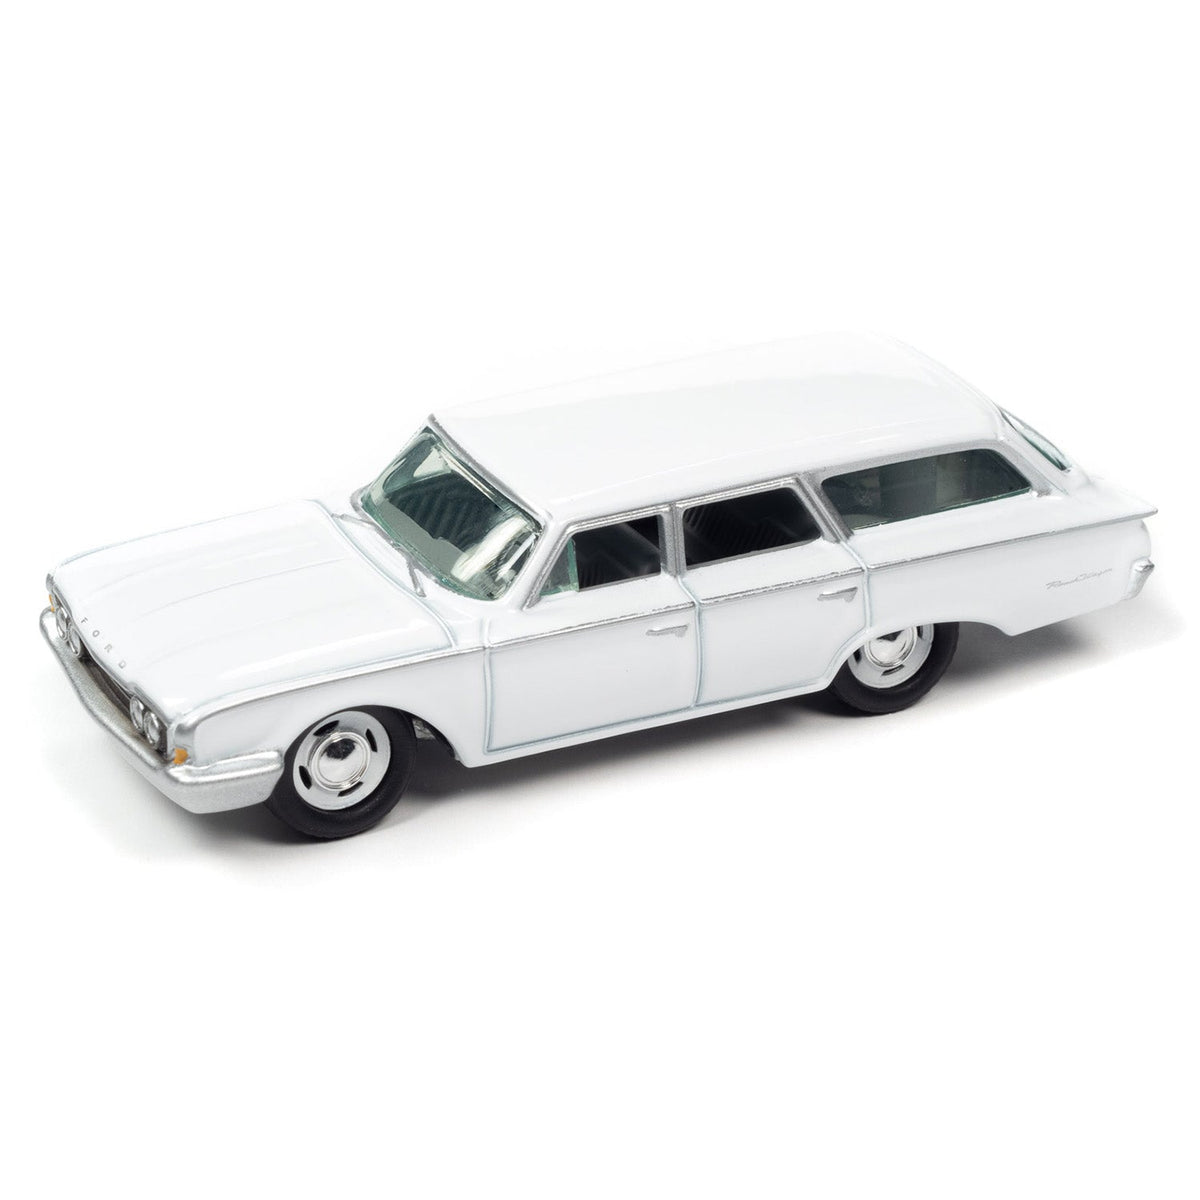 James Bond Ford Ranch Wagon Model Car - From Russia With Love Edition - By Johnny Lightning